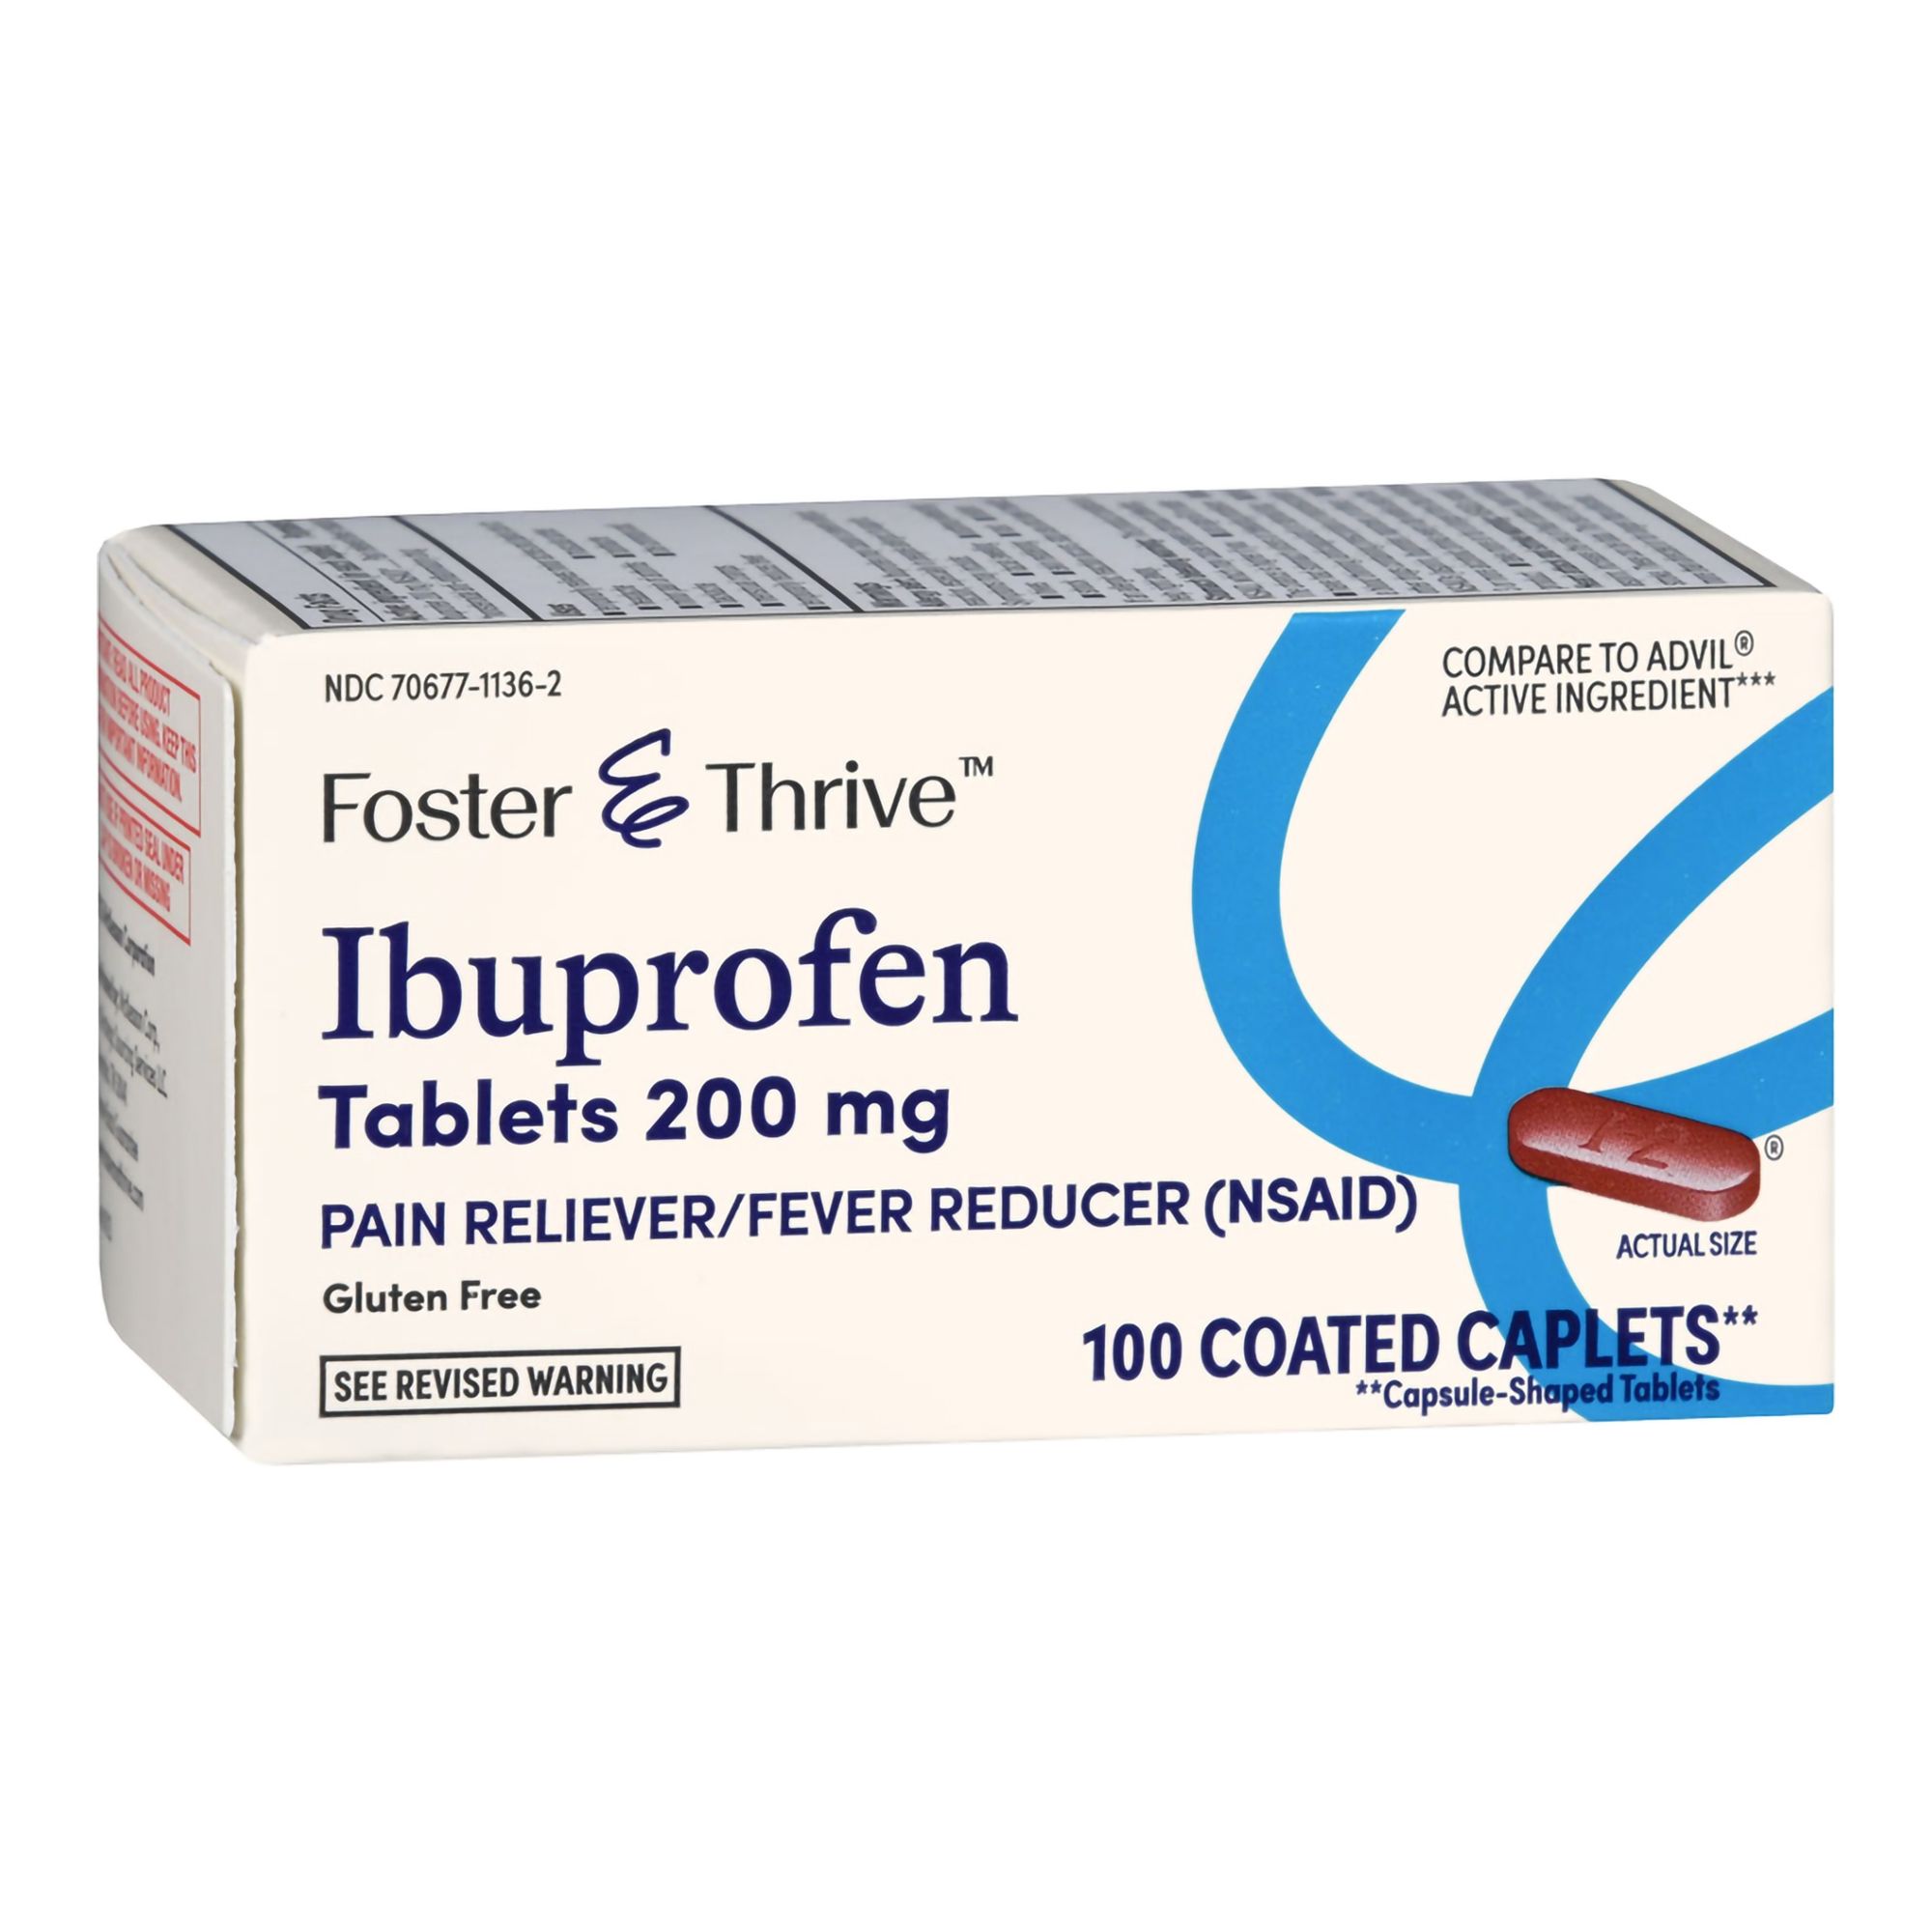 Foster & Thrive Ibuprofen Coated Caplets, 200 mg - 100 ct